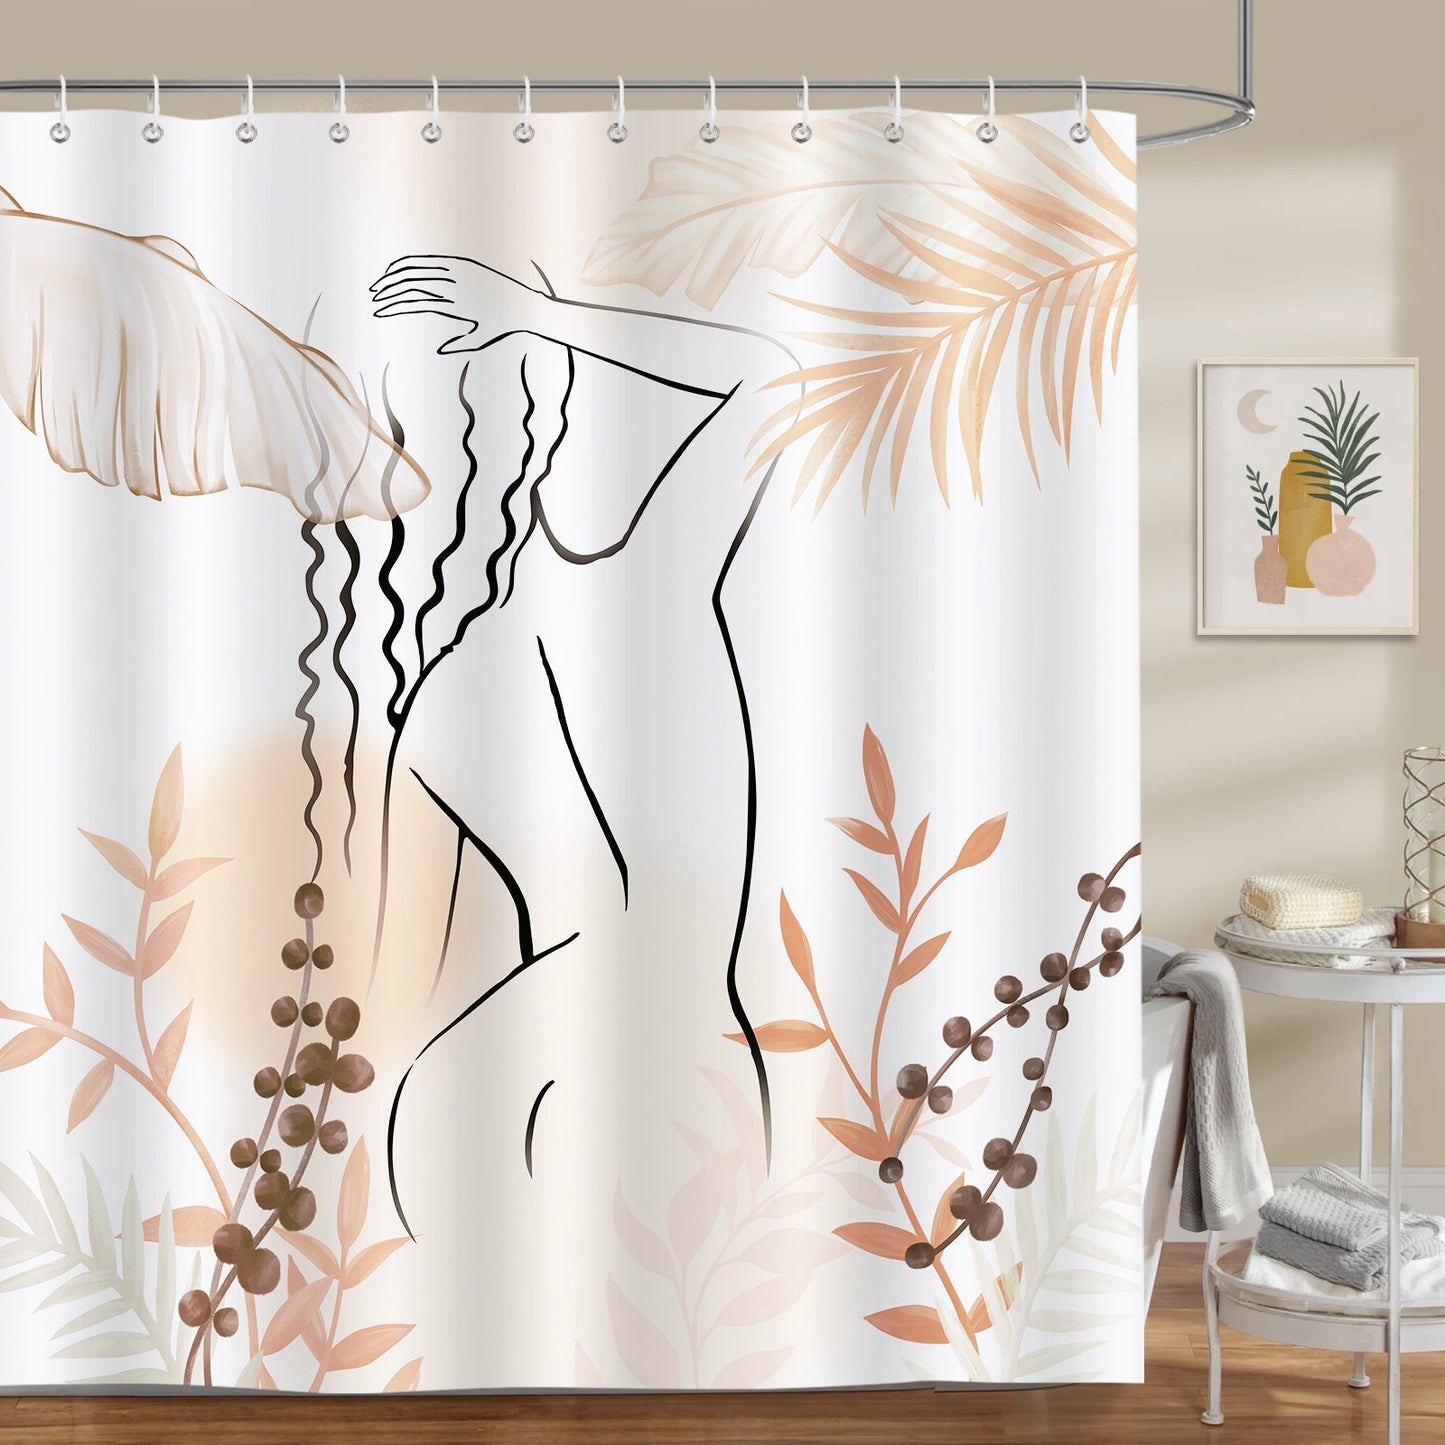 Abstract Woman Shower Curtain